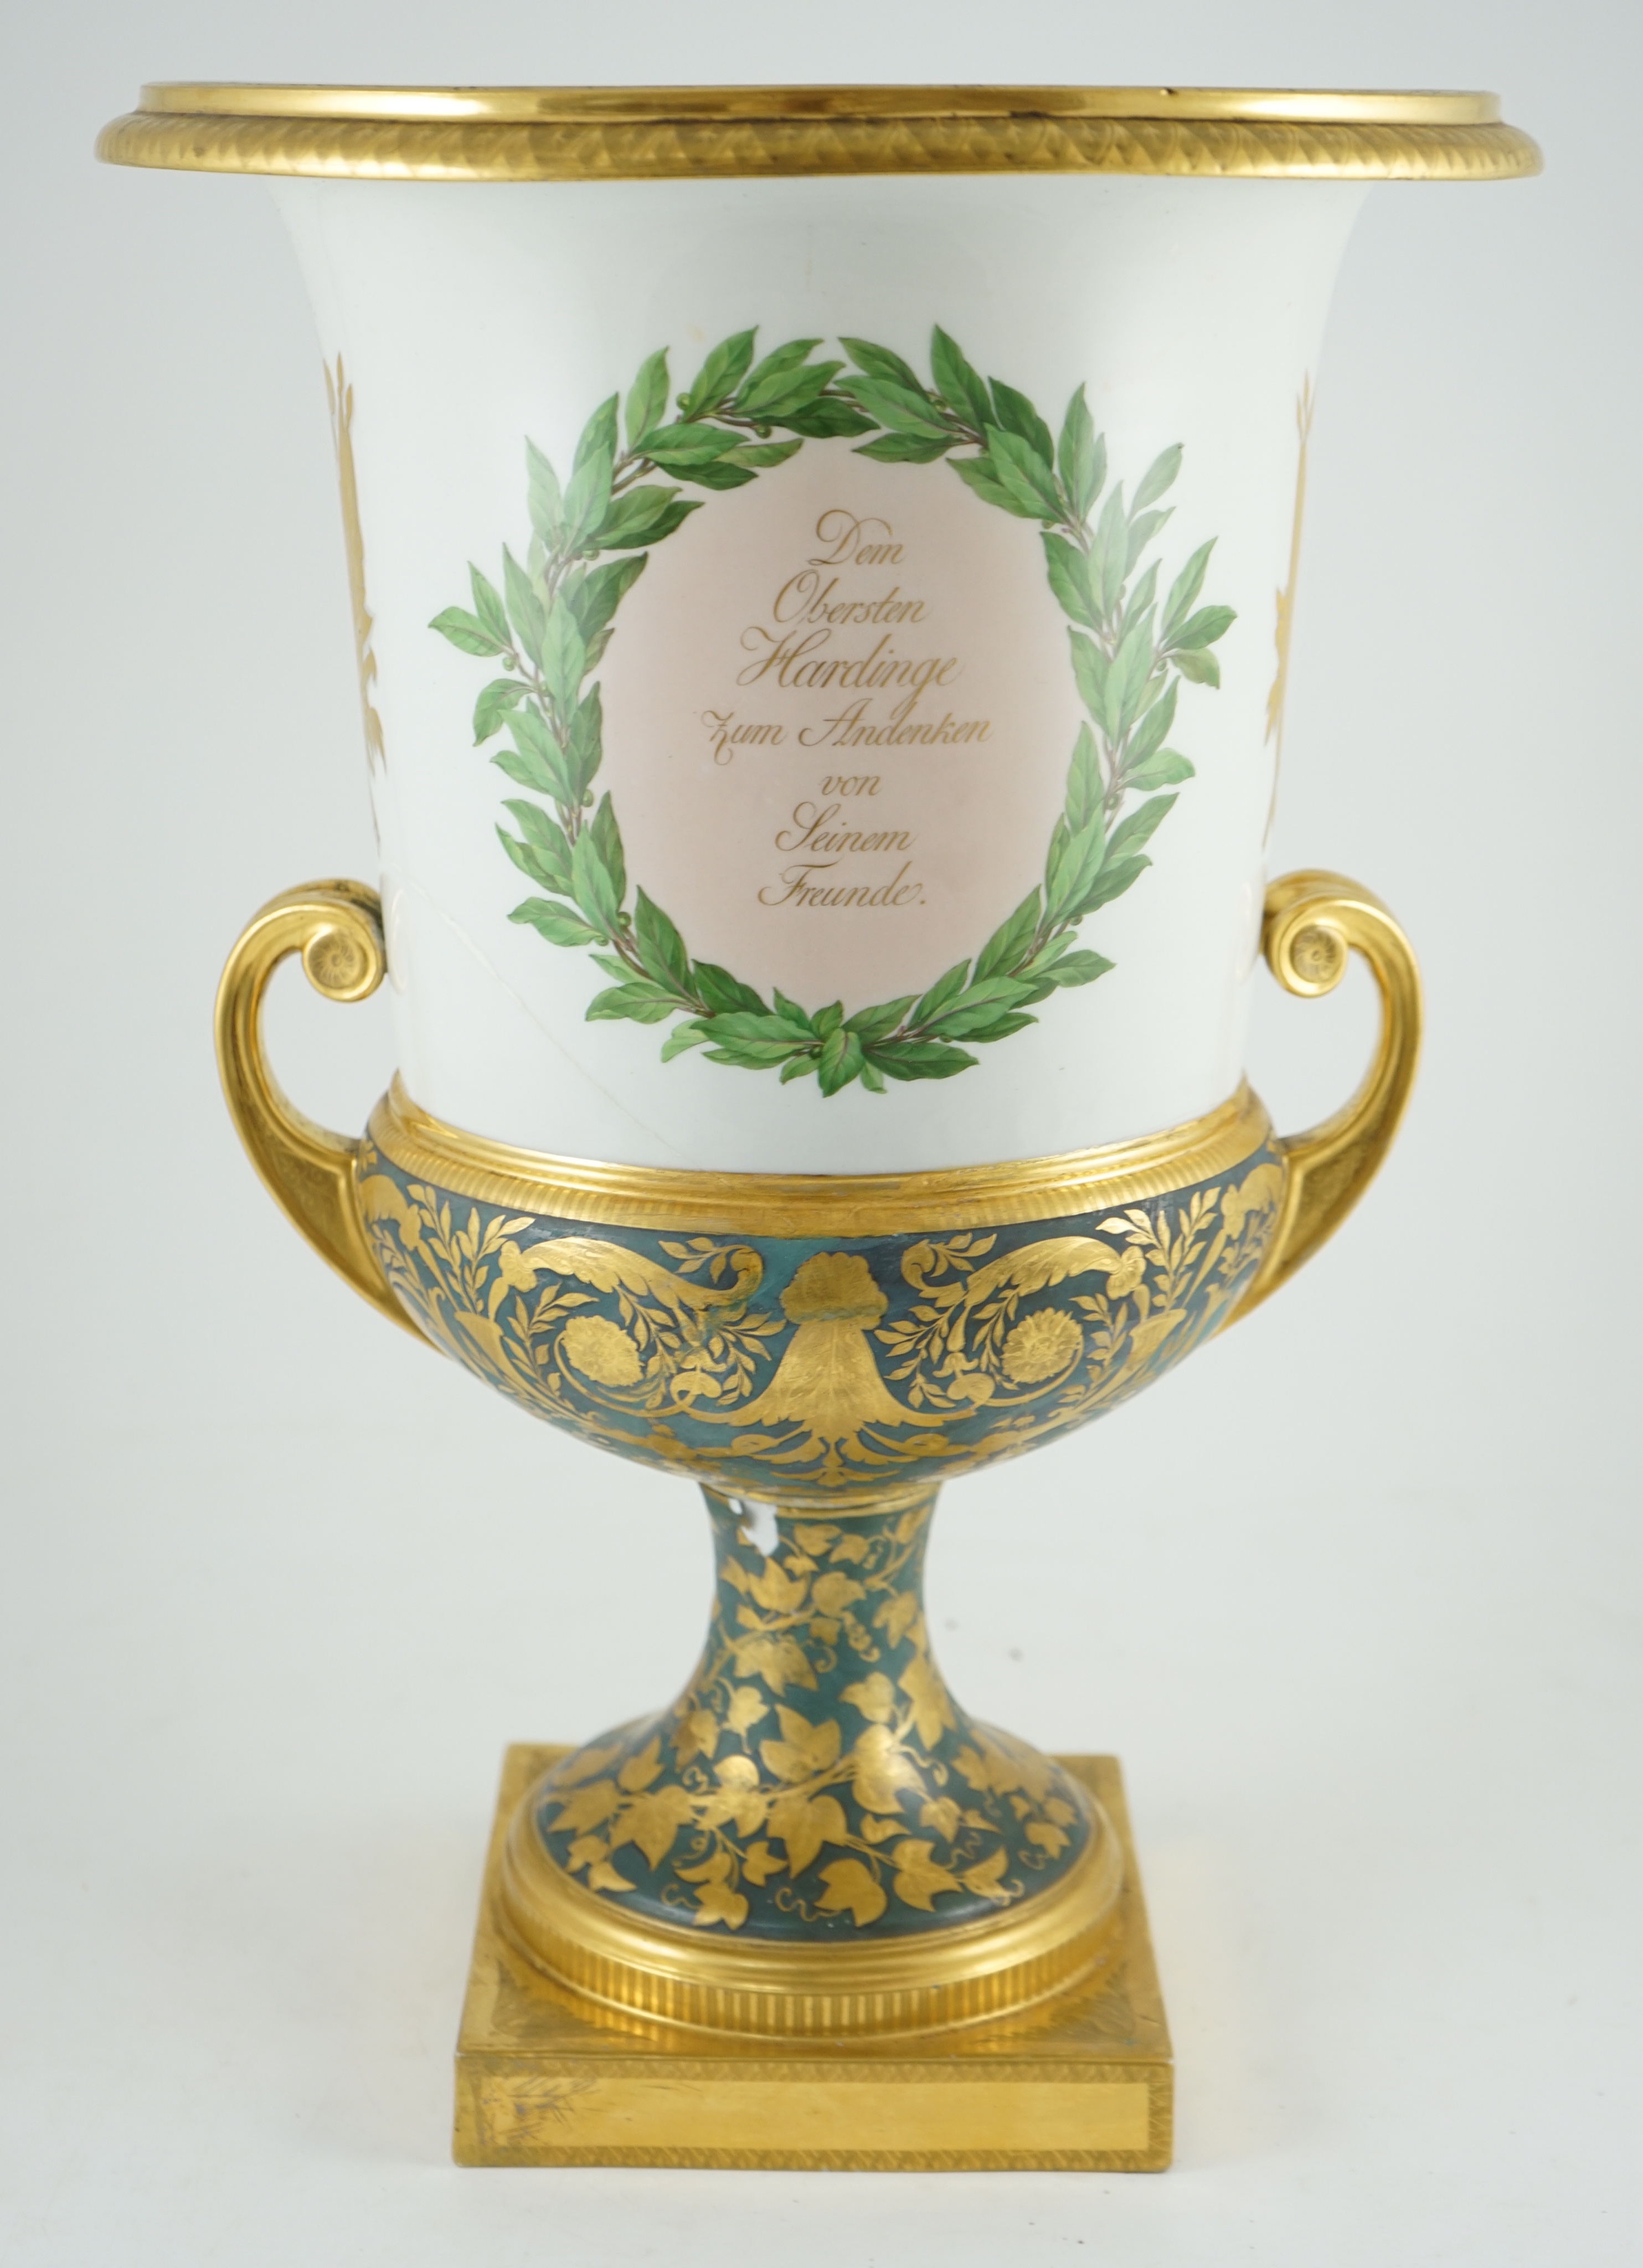 Napoleonic Wars interest: A large Berlin porcelain twin handled urn, c.1816, presented to Sir Henry Hardinge (1785-1856) by the Prussian Prince-General Blücher (1742-1819), 49cm high